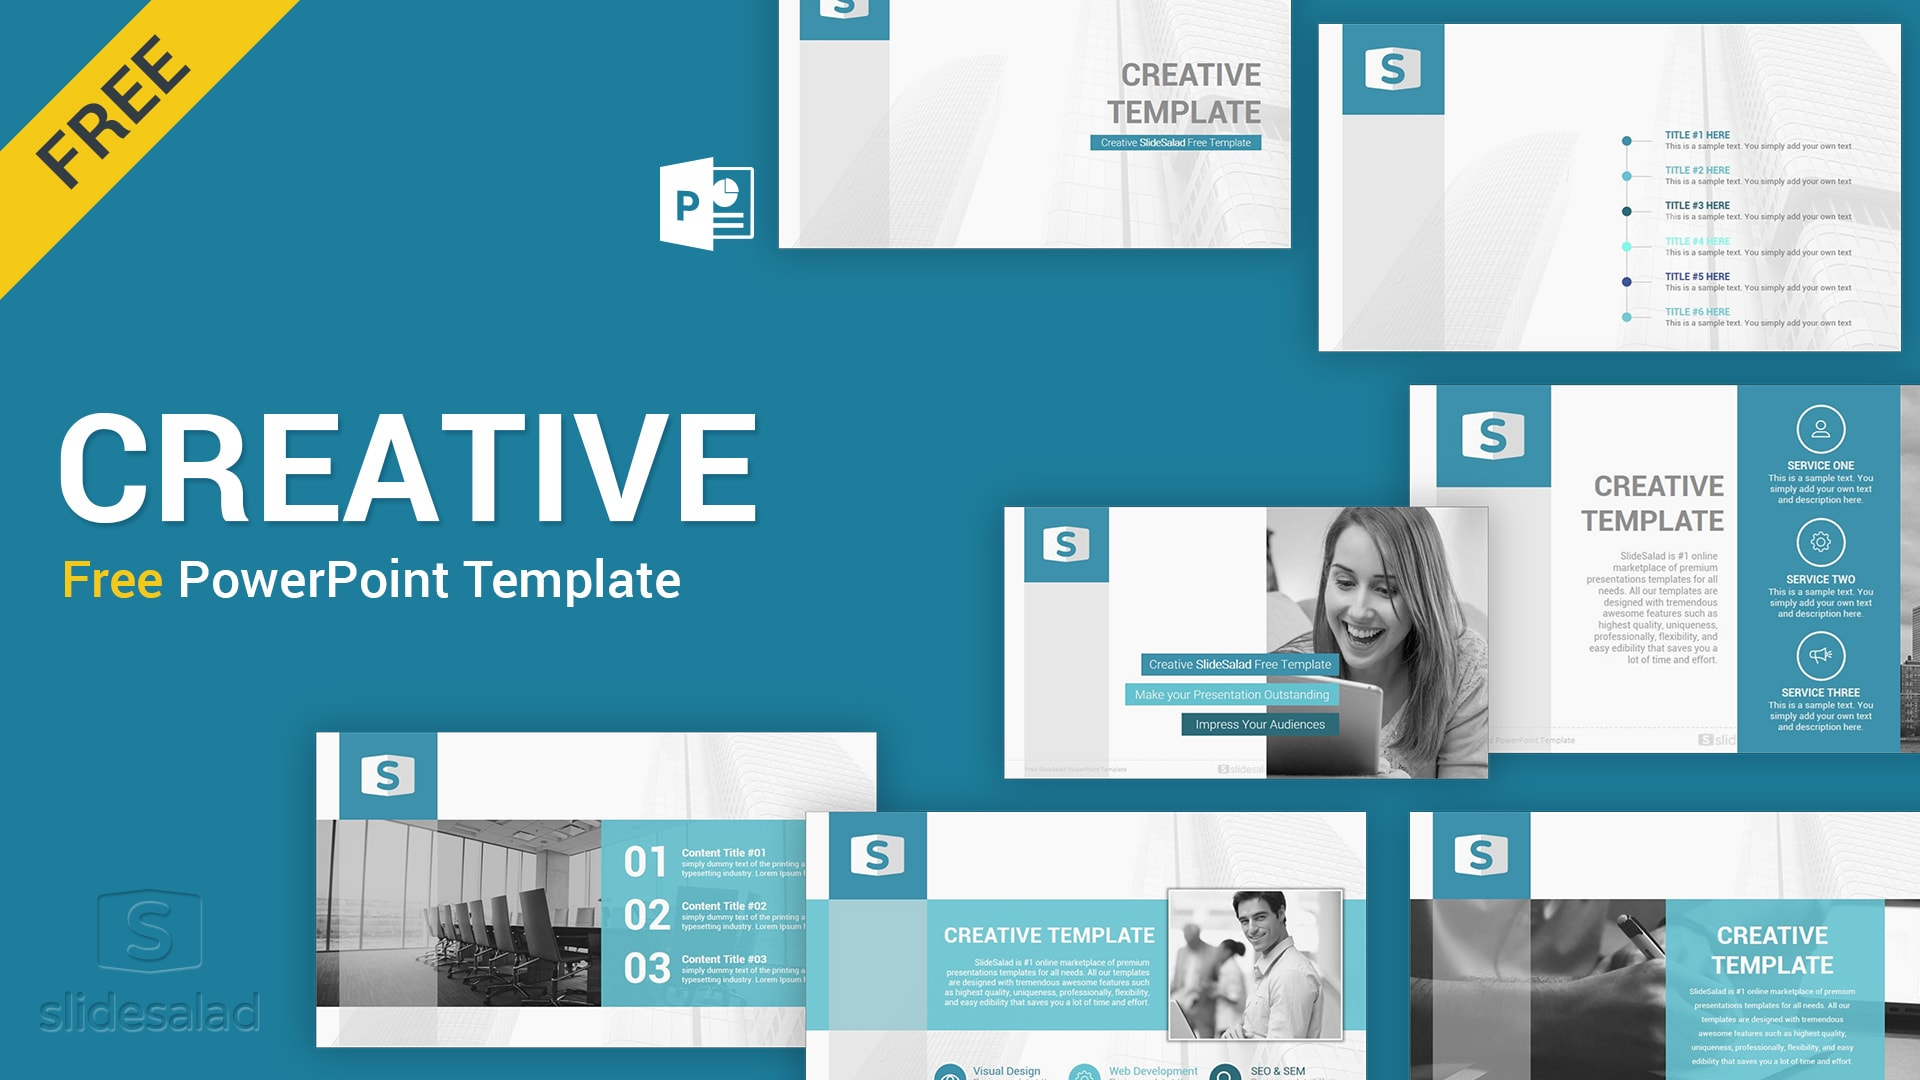 Best Free Presentation Templates Professional Designs 2020 Throughout Virus Powerpoint Template Free Download